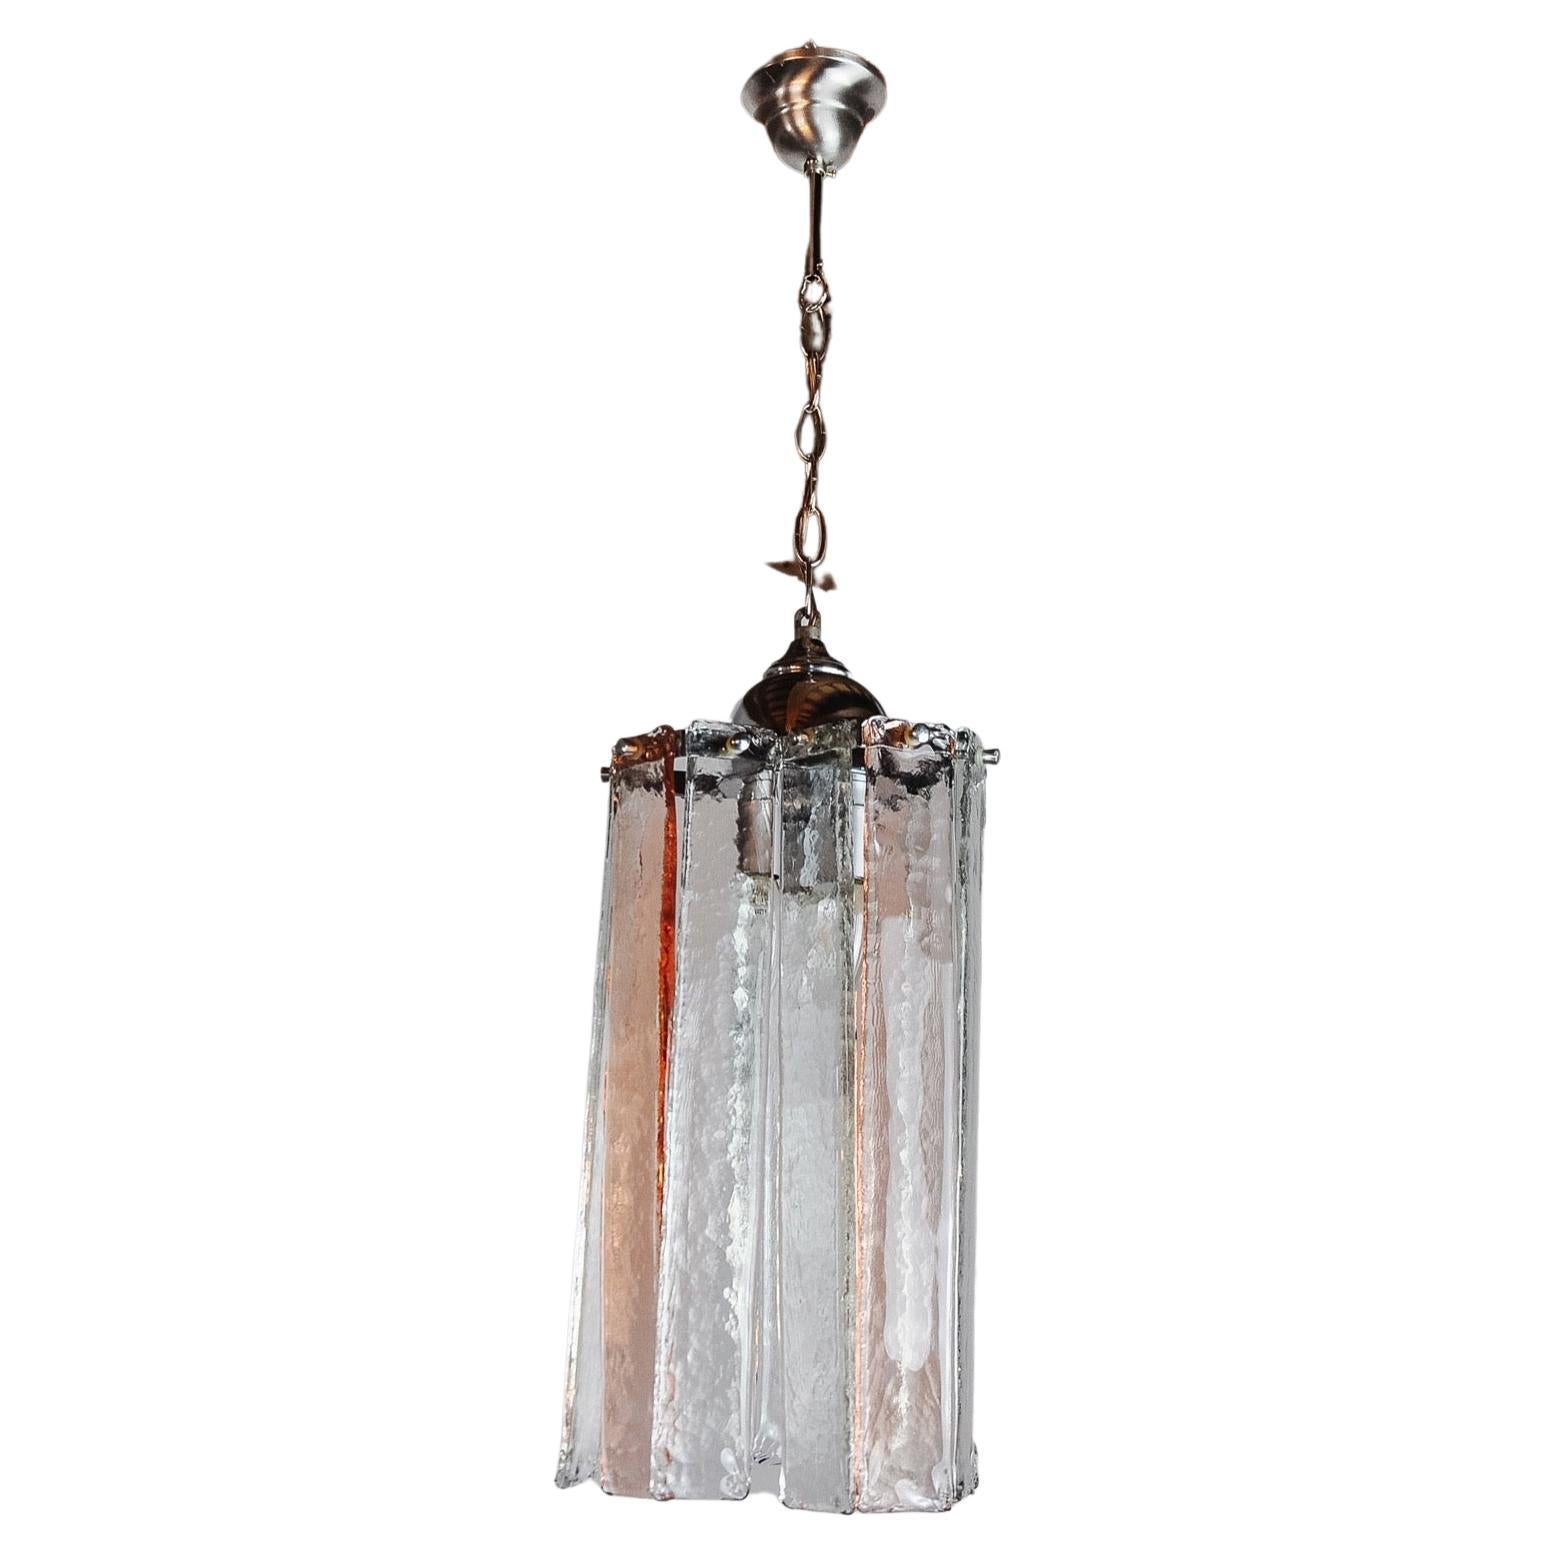 Poliarte chandelier by Albano Poli, pink and transparent murano glass, Italy, 19 For Sale